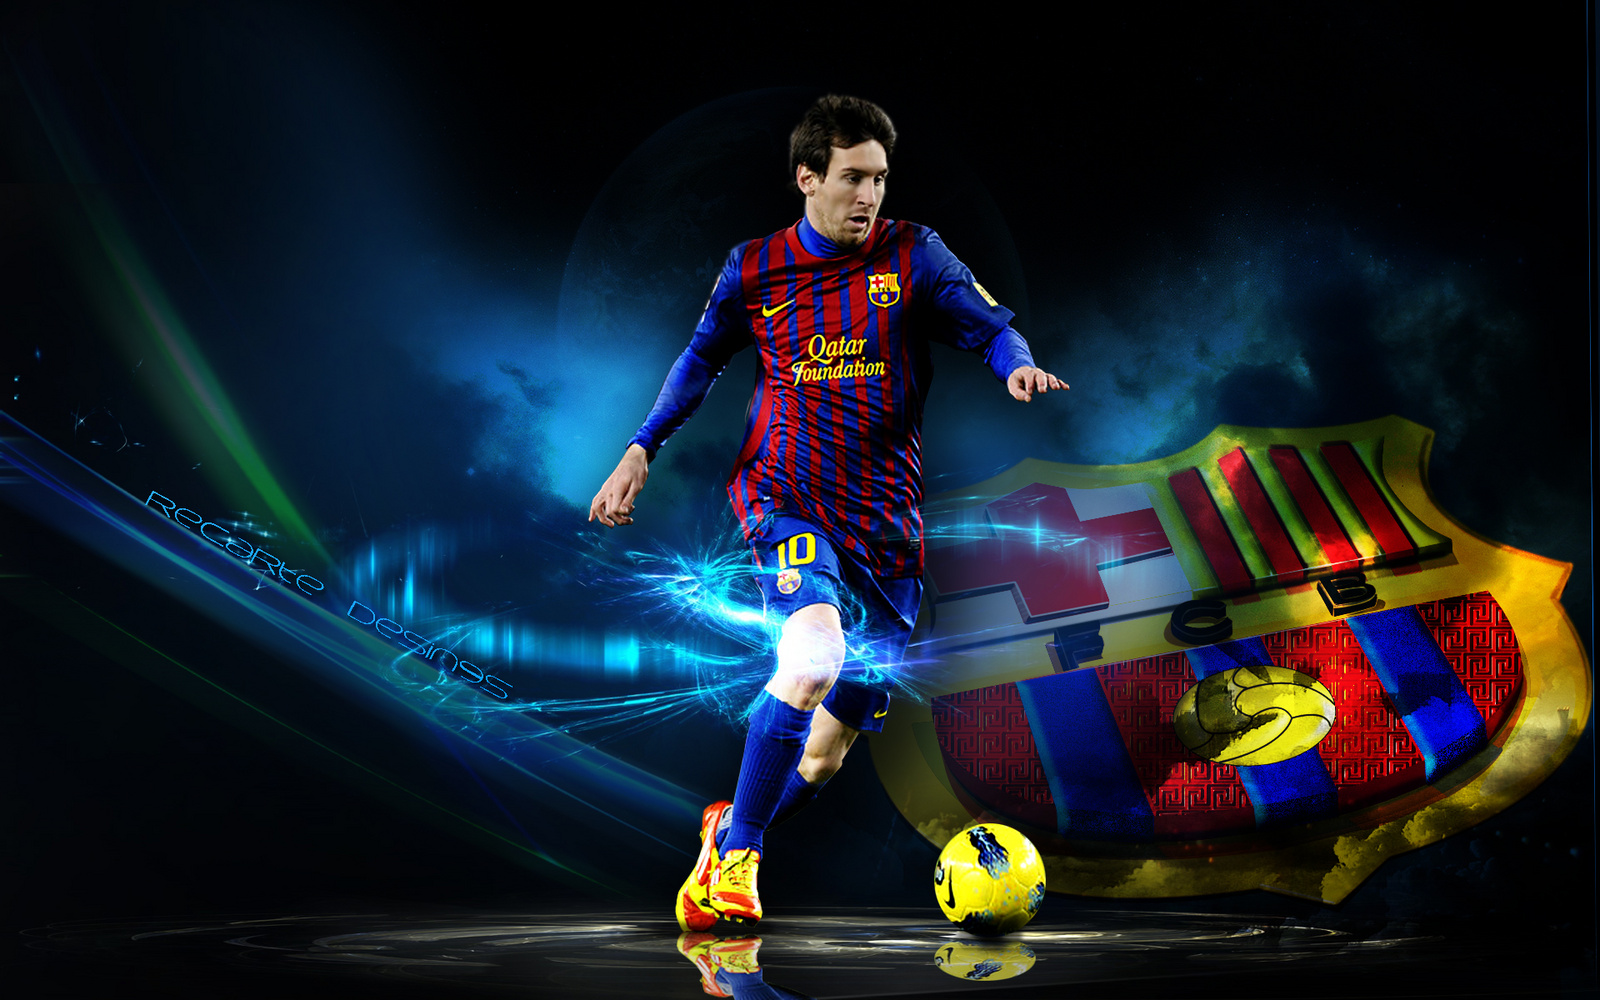 Lionel Messi Football Player Latest Hd Wallpapers HD Pictures 2013 1600x1000